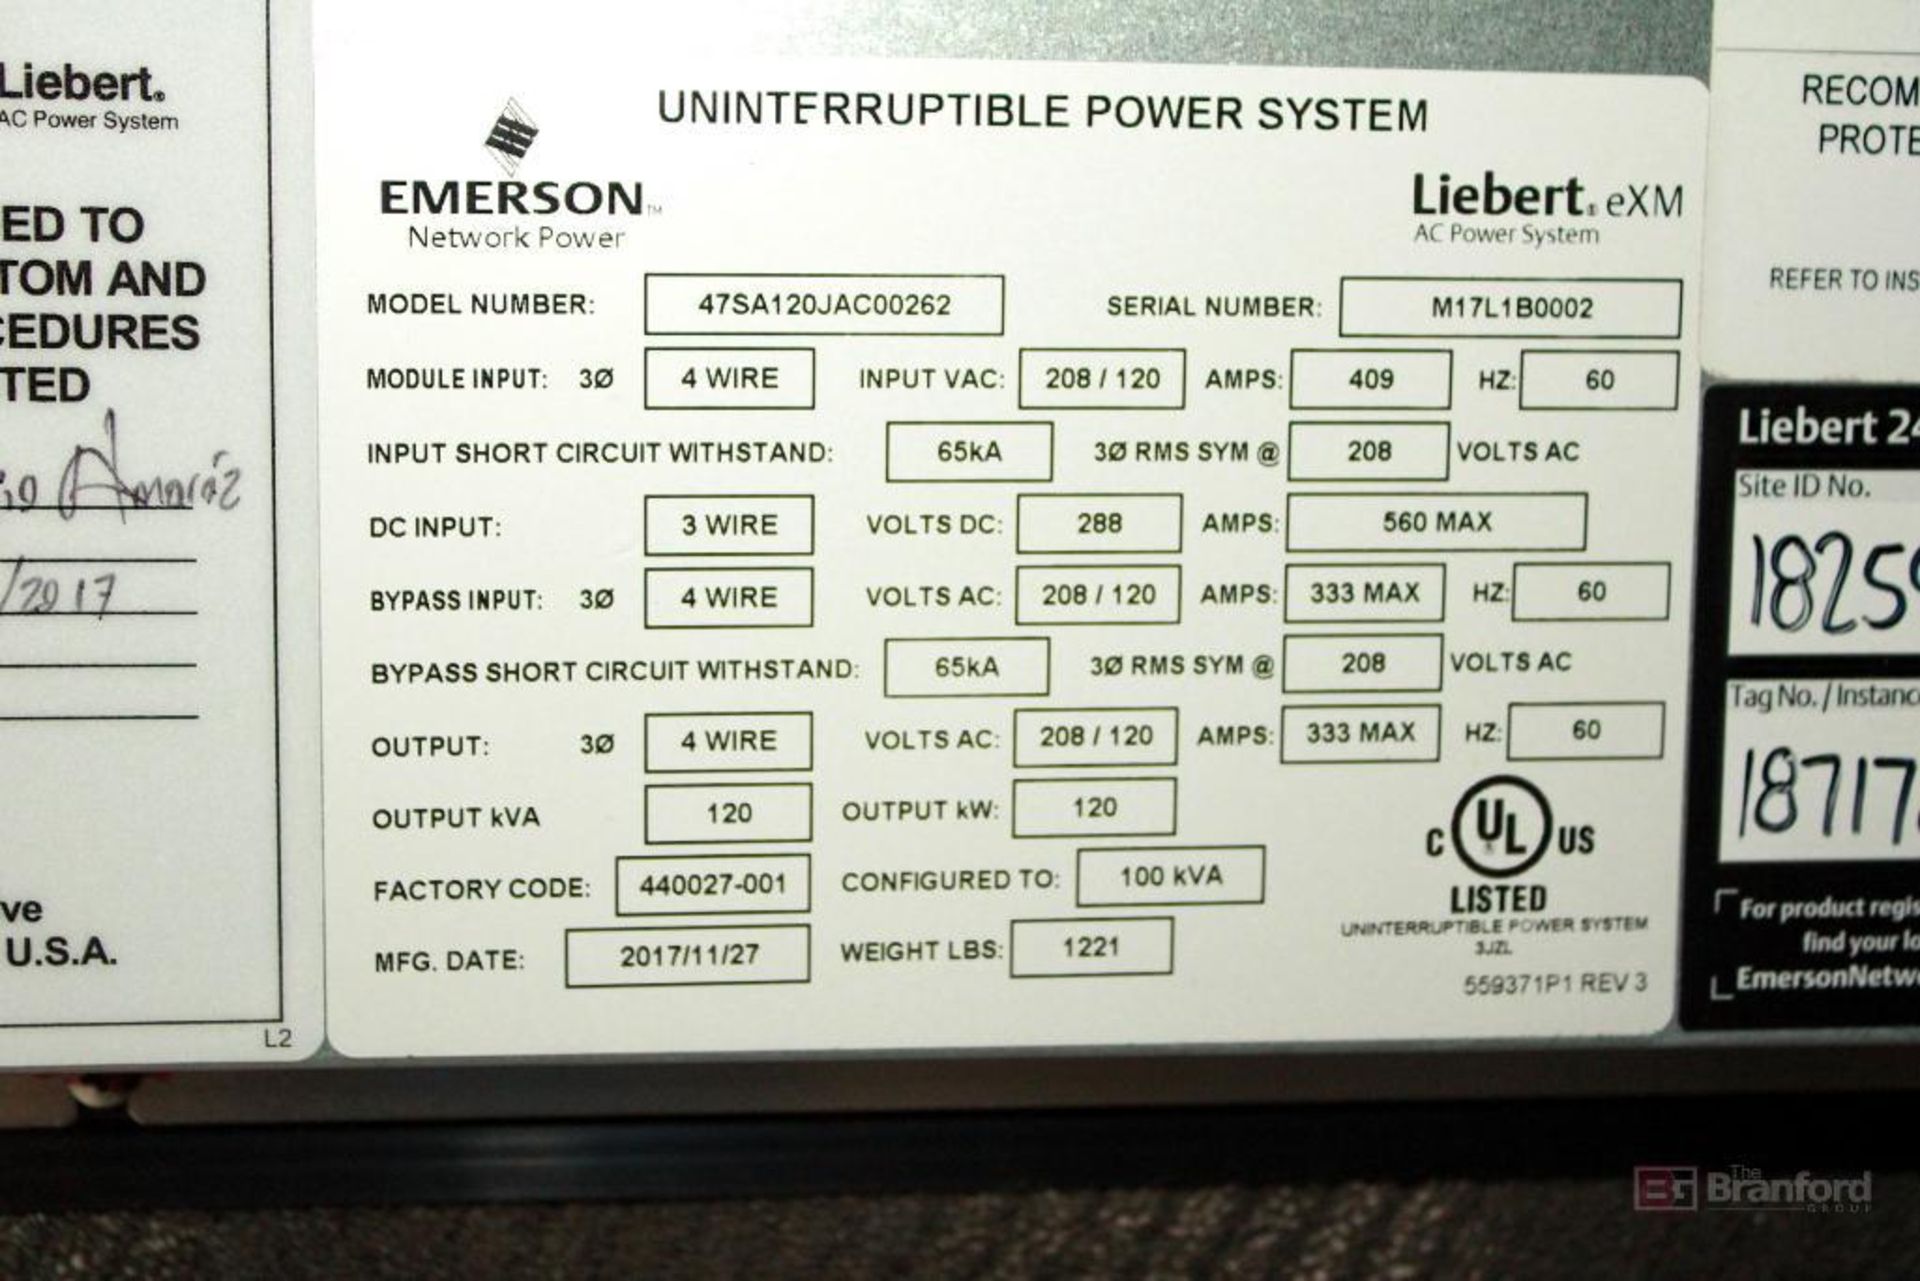 Vertiv Emerson Libert EXM, Battery Back Up System, Touch Screen Control - Image 5 of 5